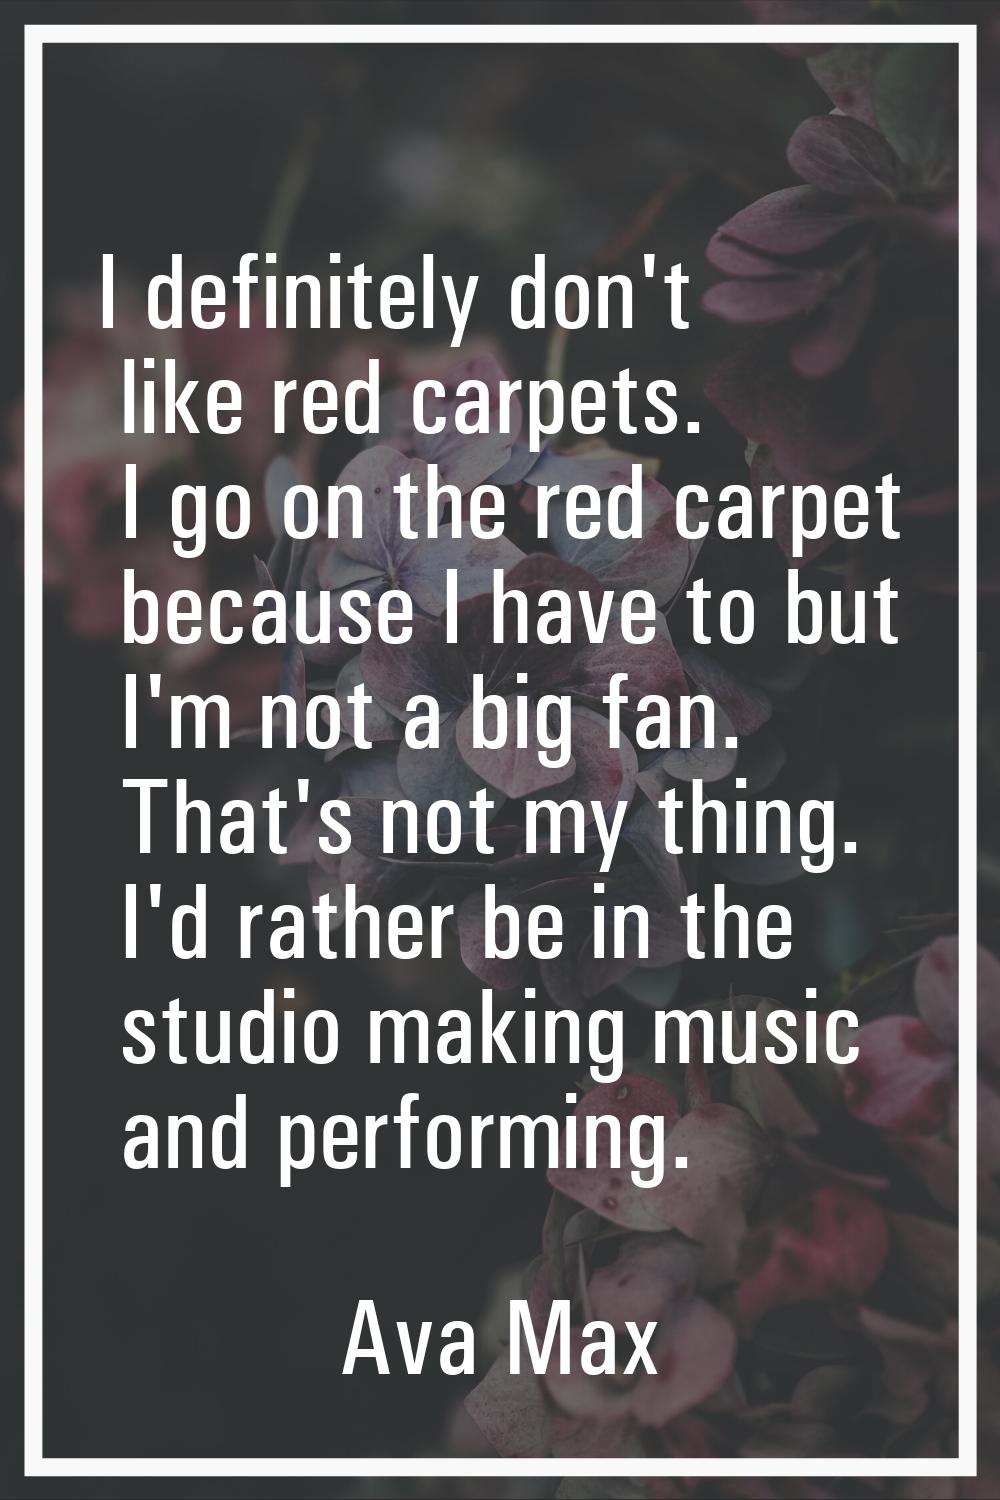 I definitely don't like red carpets. I go on the red carpet because I have to but I'm not a big fan